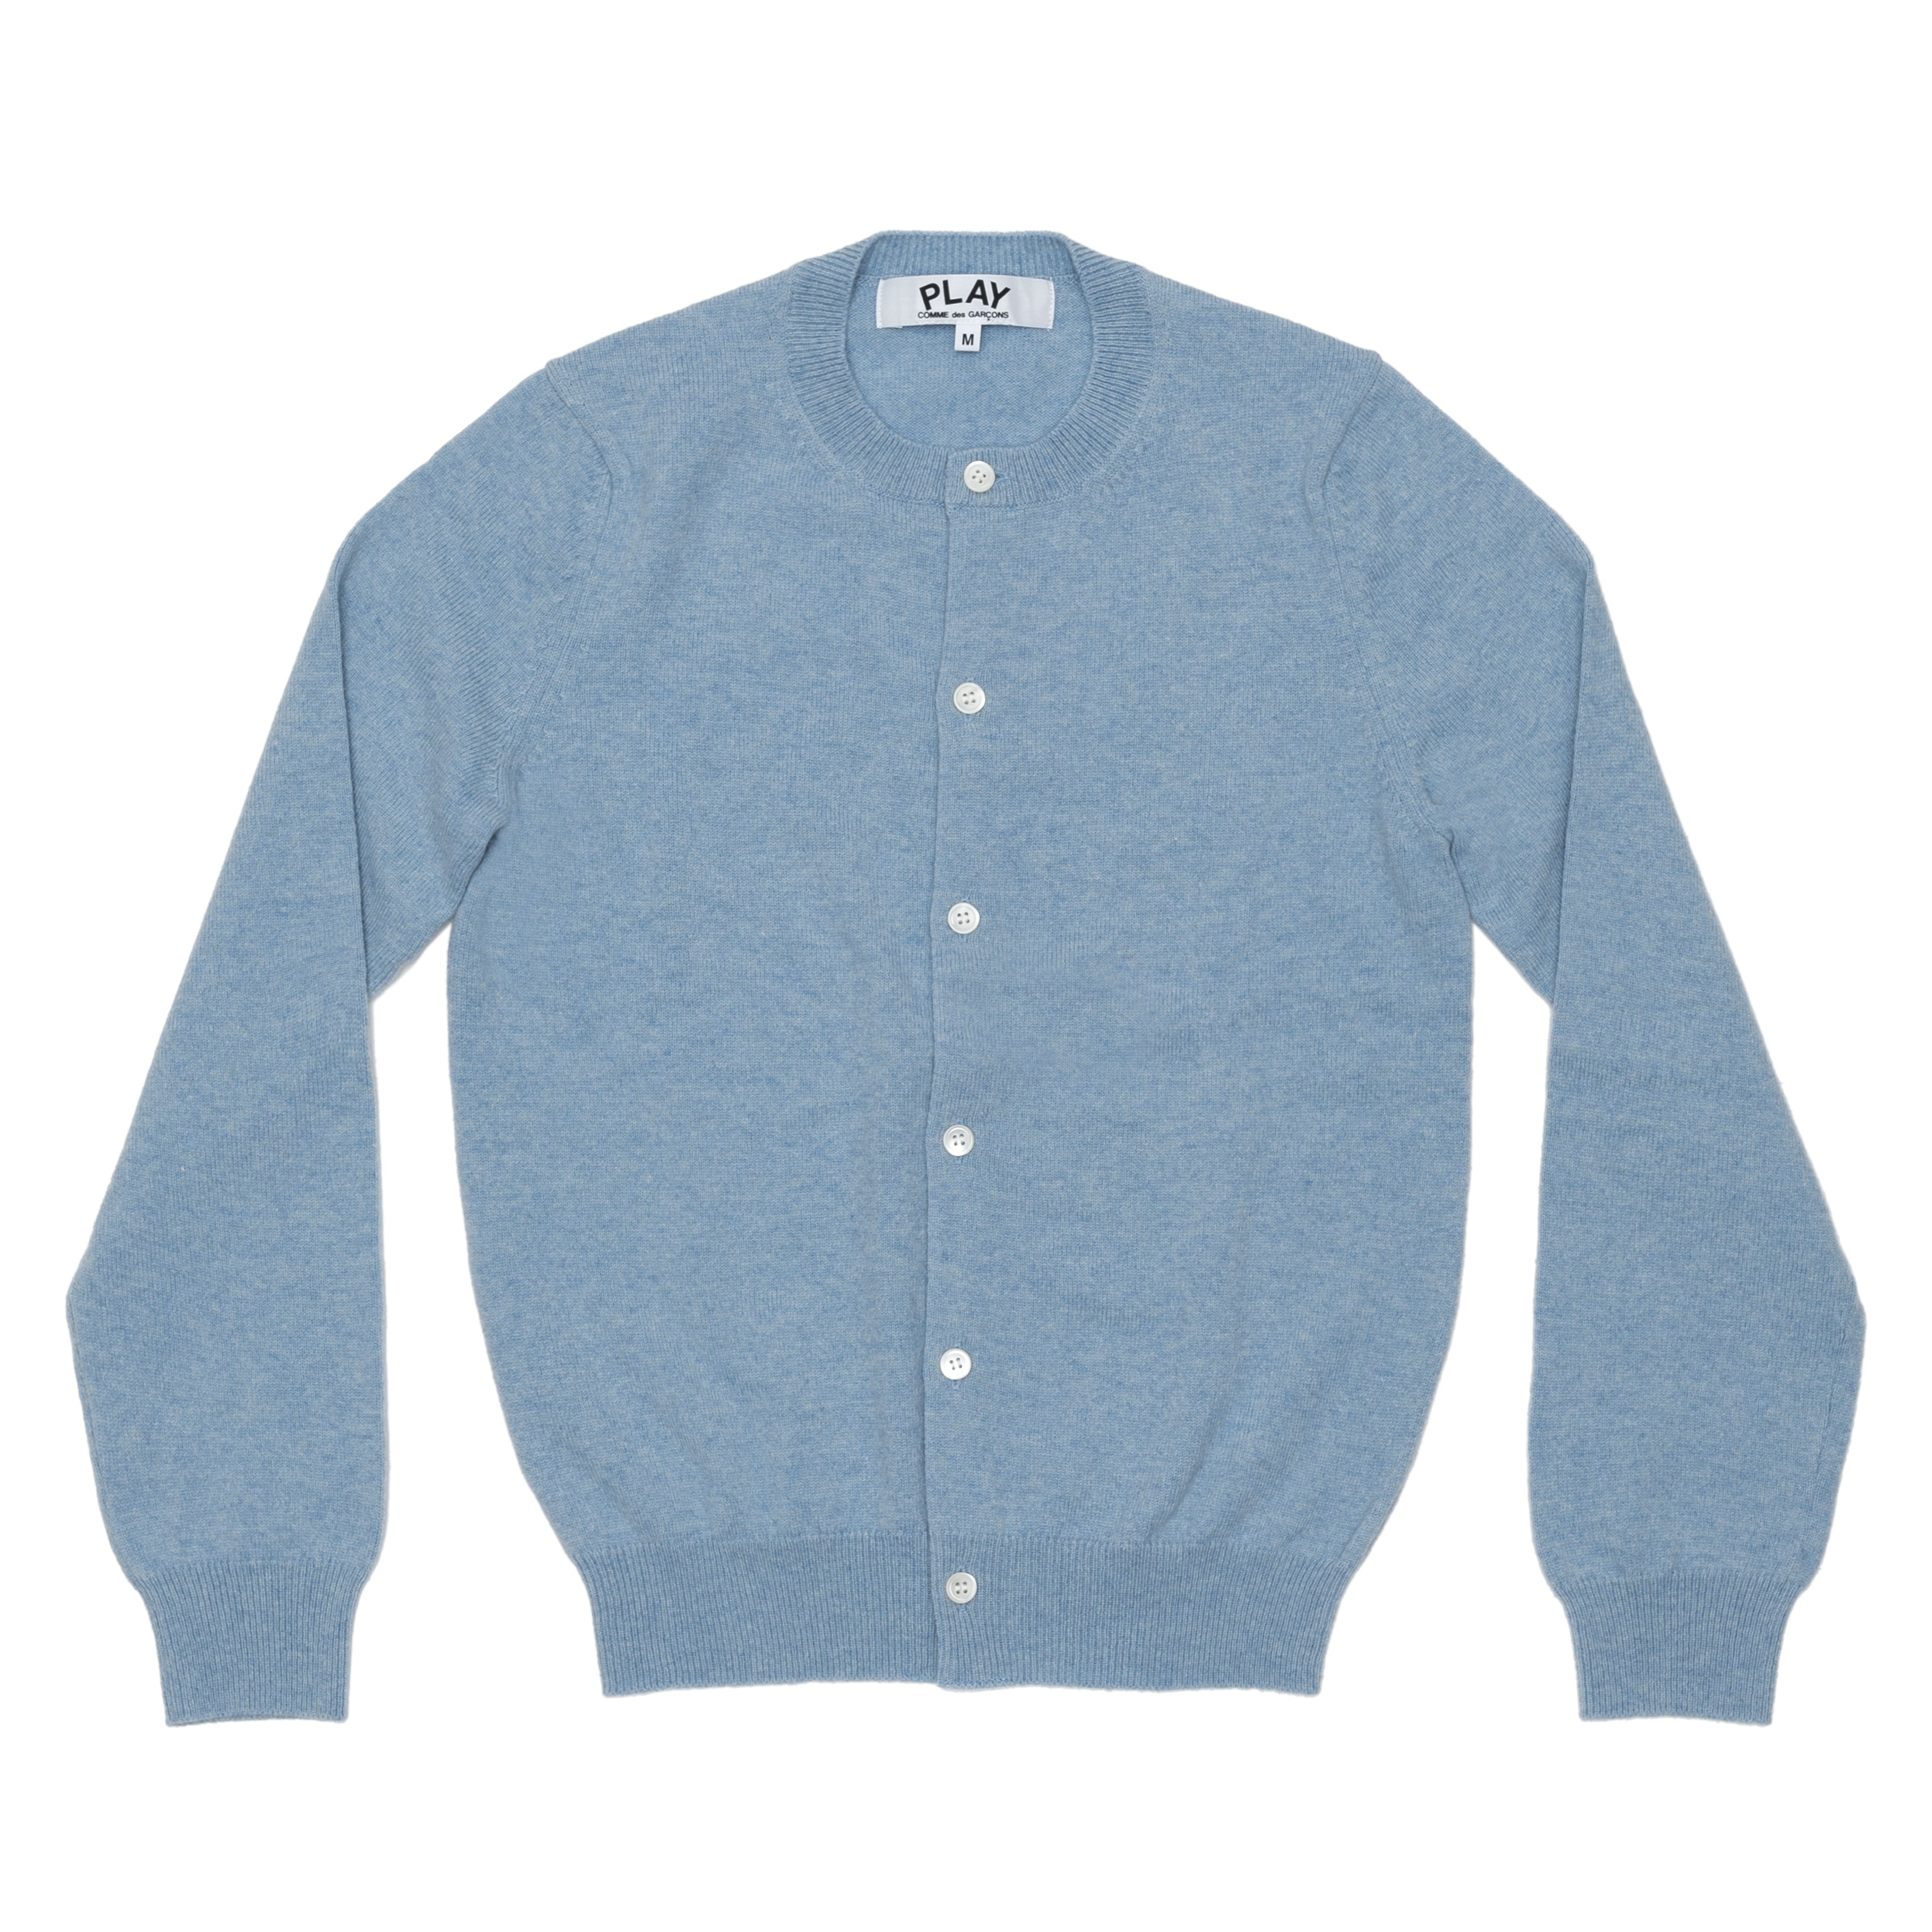 PLAY CDG - Top Dyed Carded Lambswool Women's Cardigan - (Blue)